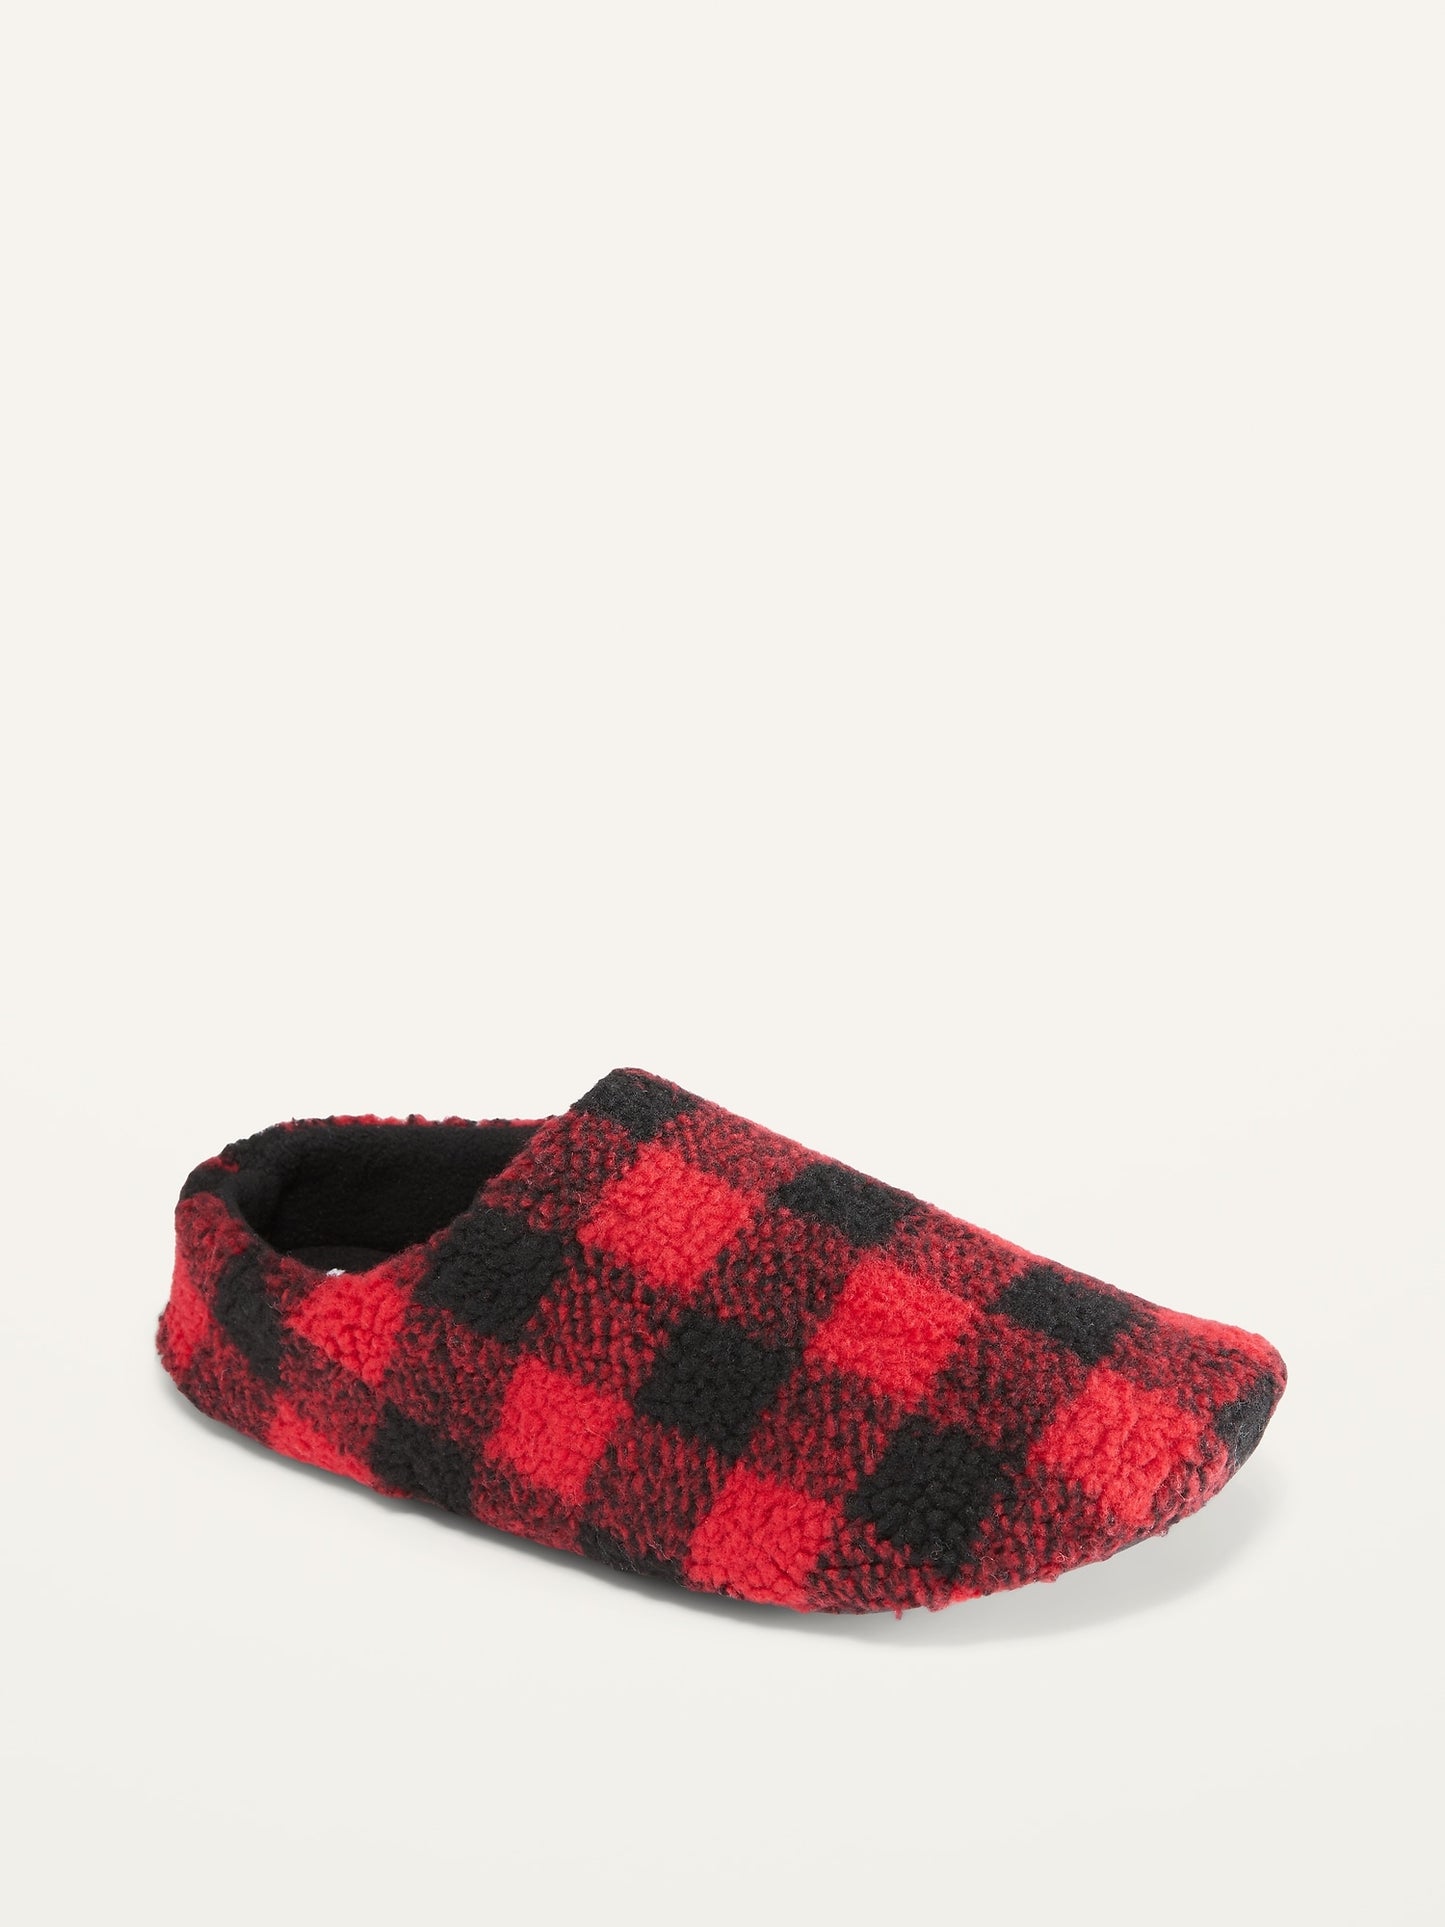 ON Cozy Sherpa Slippers For Men - Red Buffalo Plaid